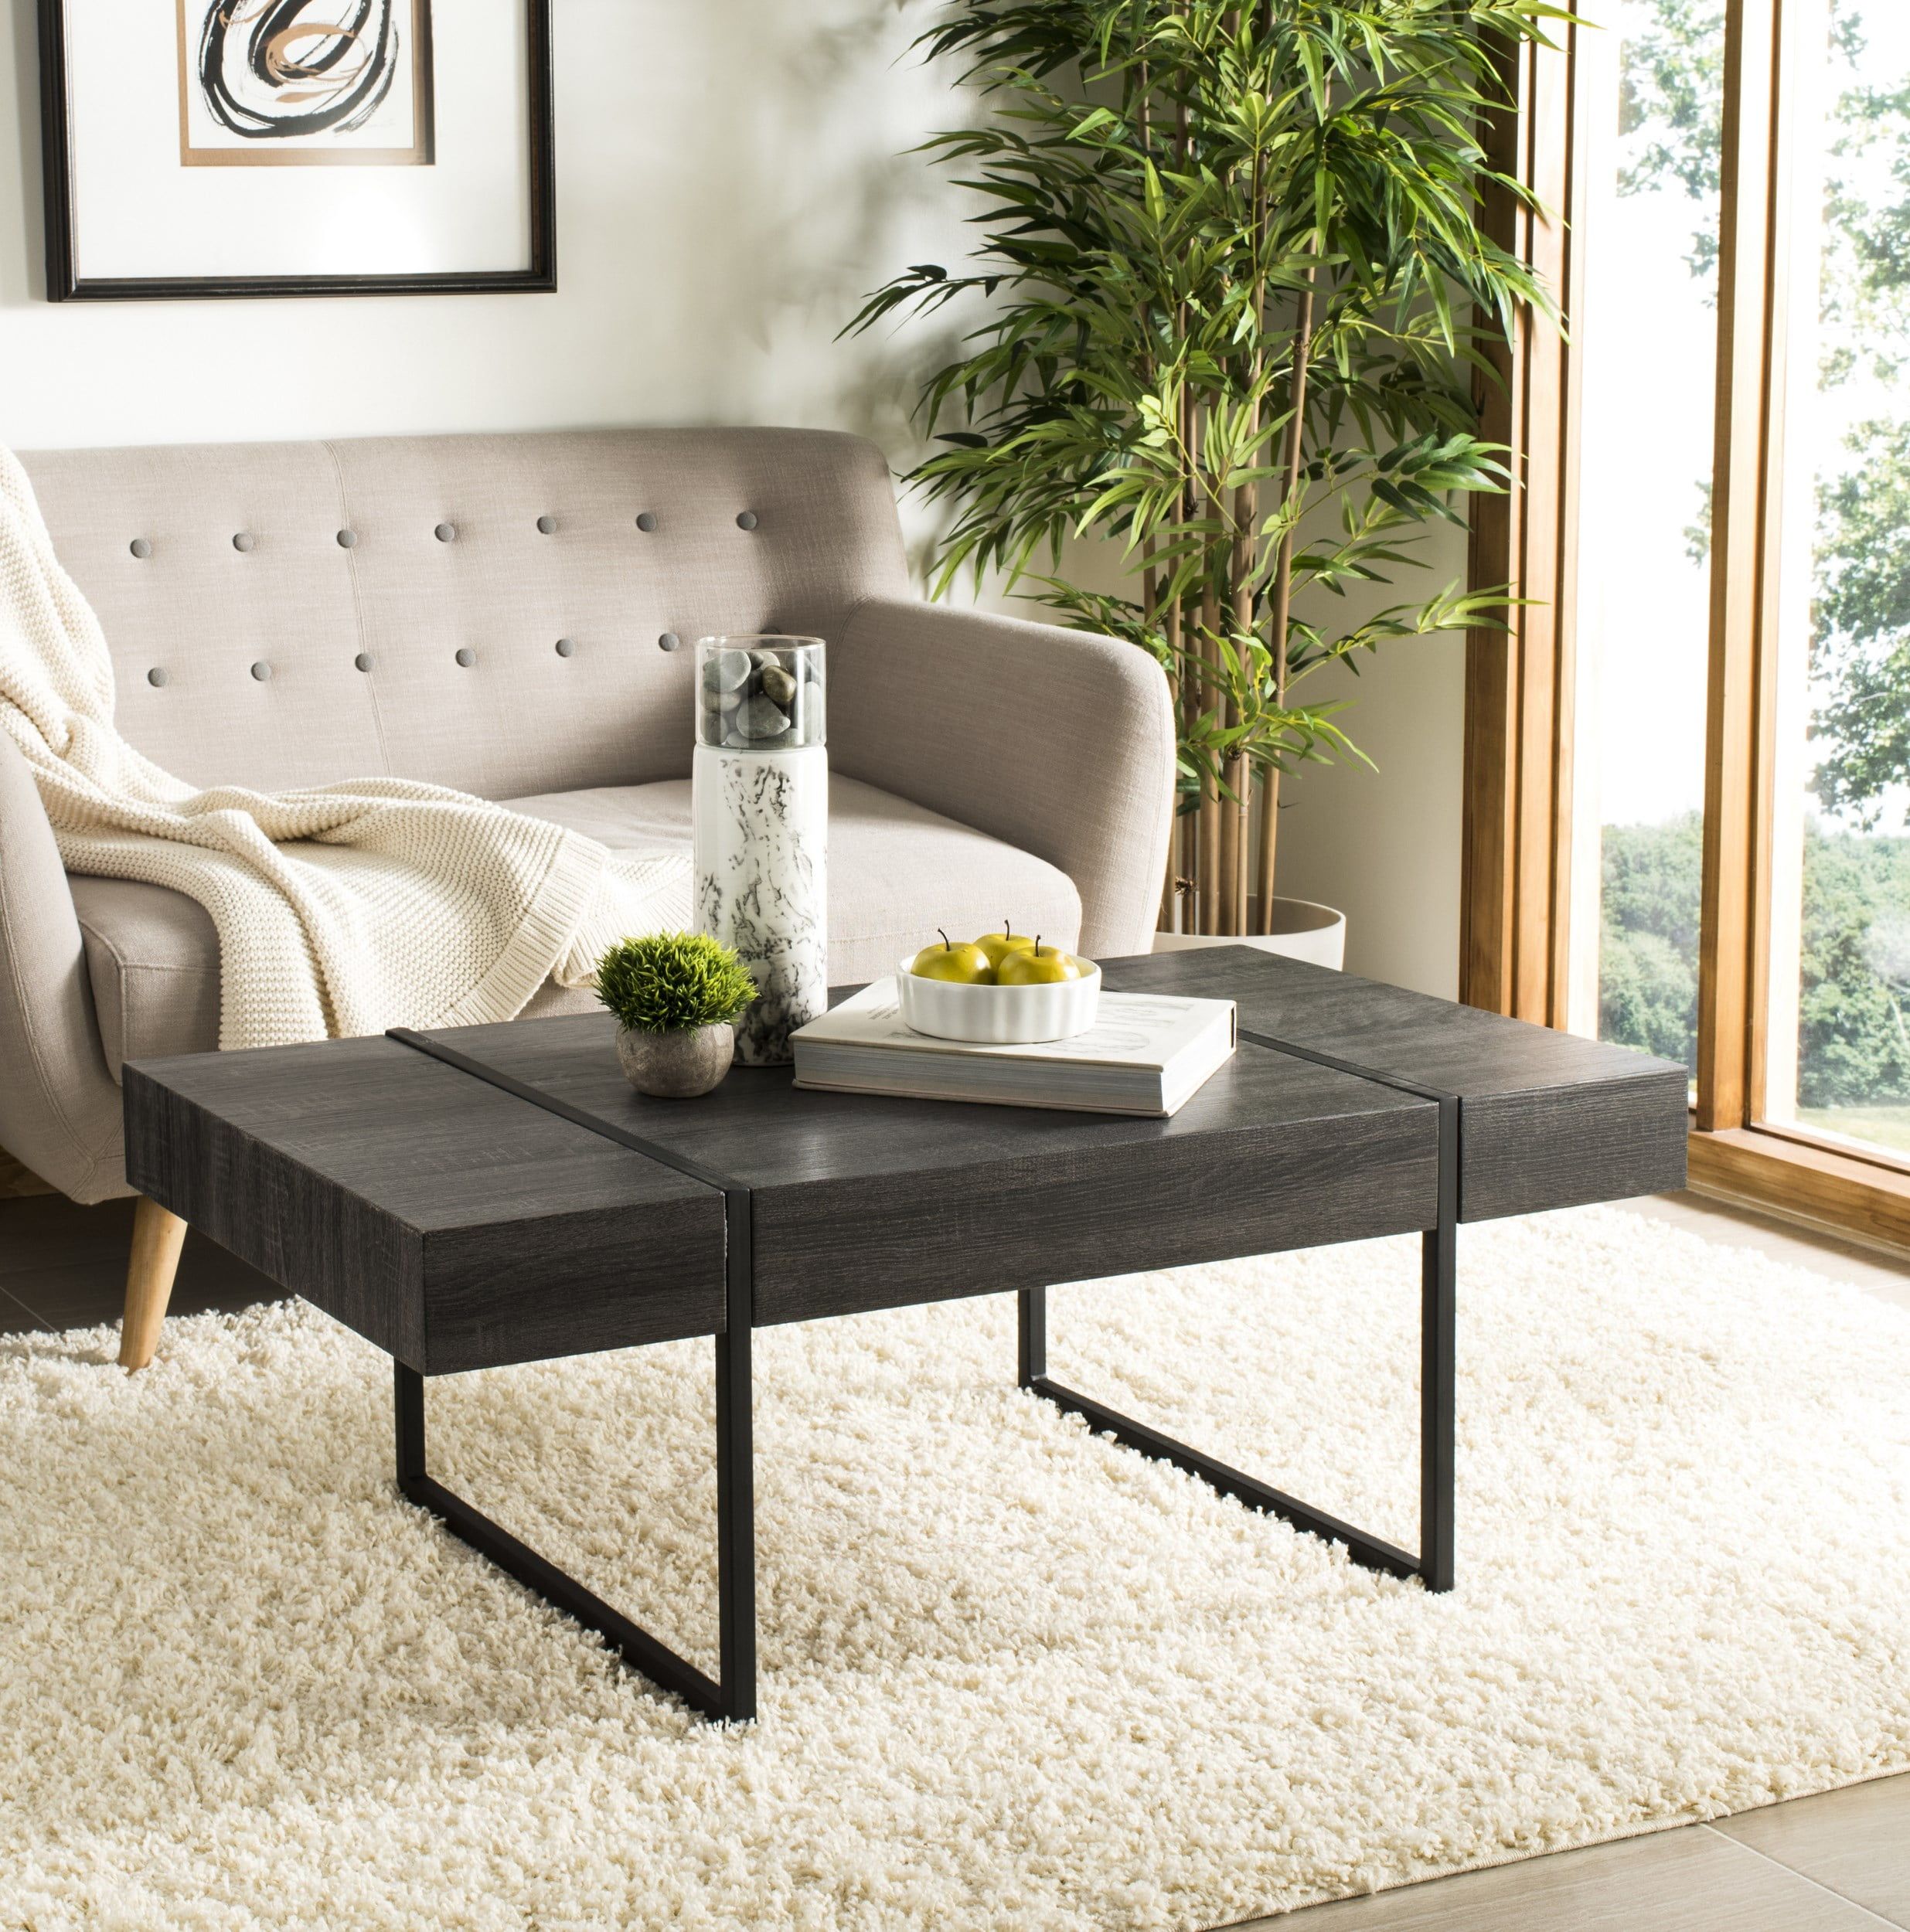 Safavieh Tristan Rectangular Modern Coffee Table Black – Walmart Pertaining To Rectangular Coffee Tables With Pedestal Bases (Gallery 1 of 20)